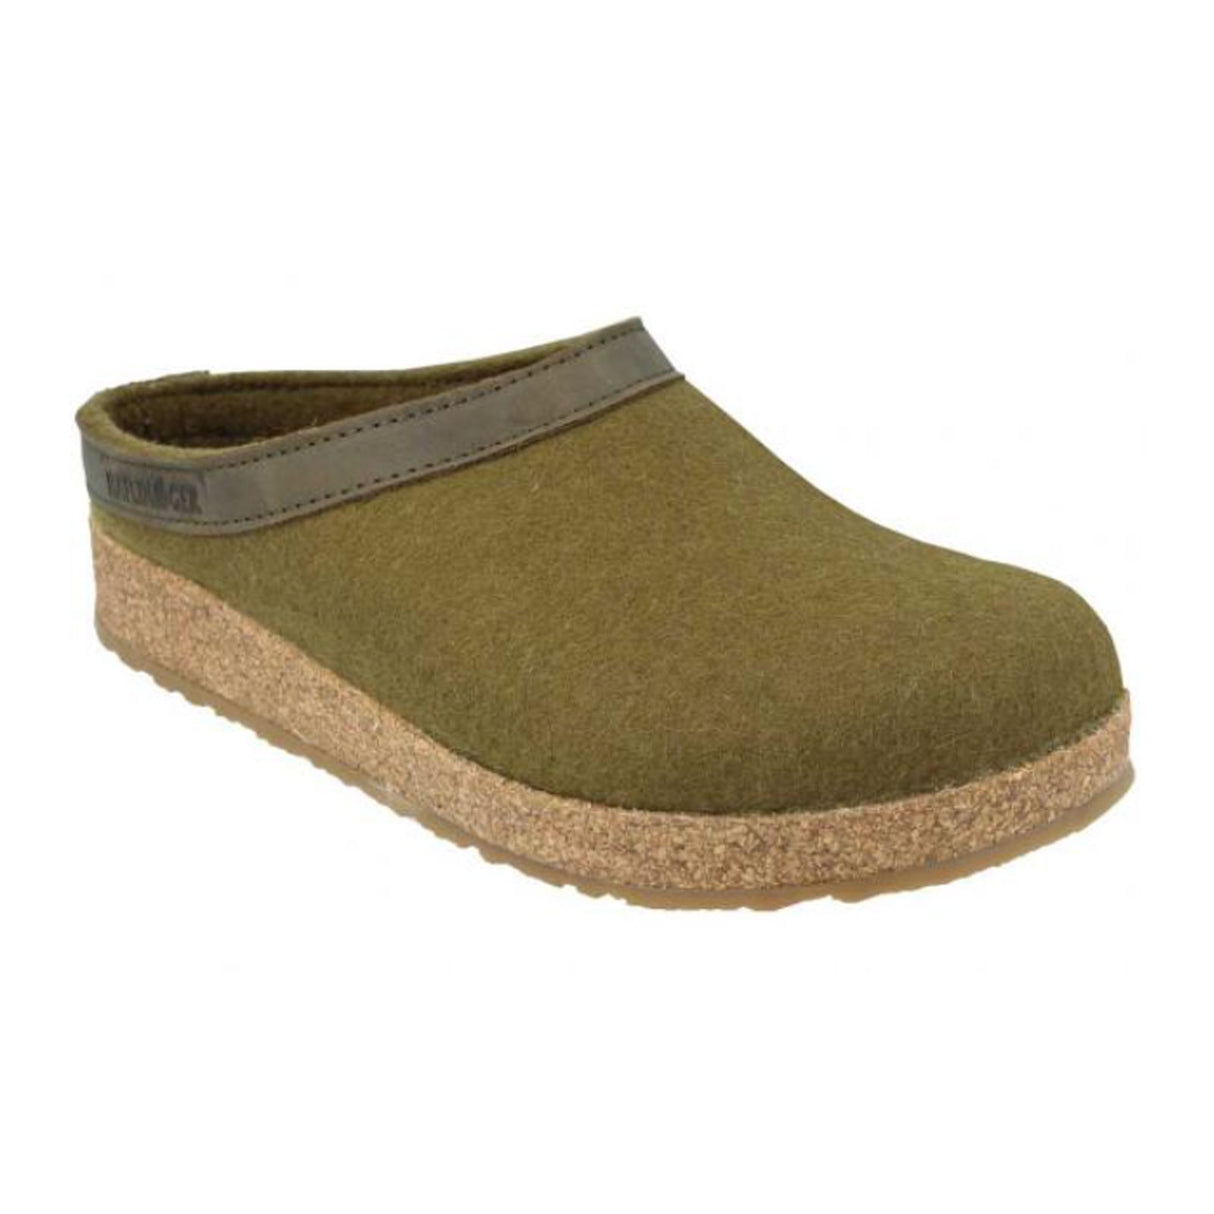 Haflinger GZL Clog (Unisex) - Olive Green Dress-Casual - Clogs & Mules - The Heel Shoe Fitters